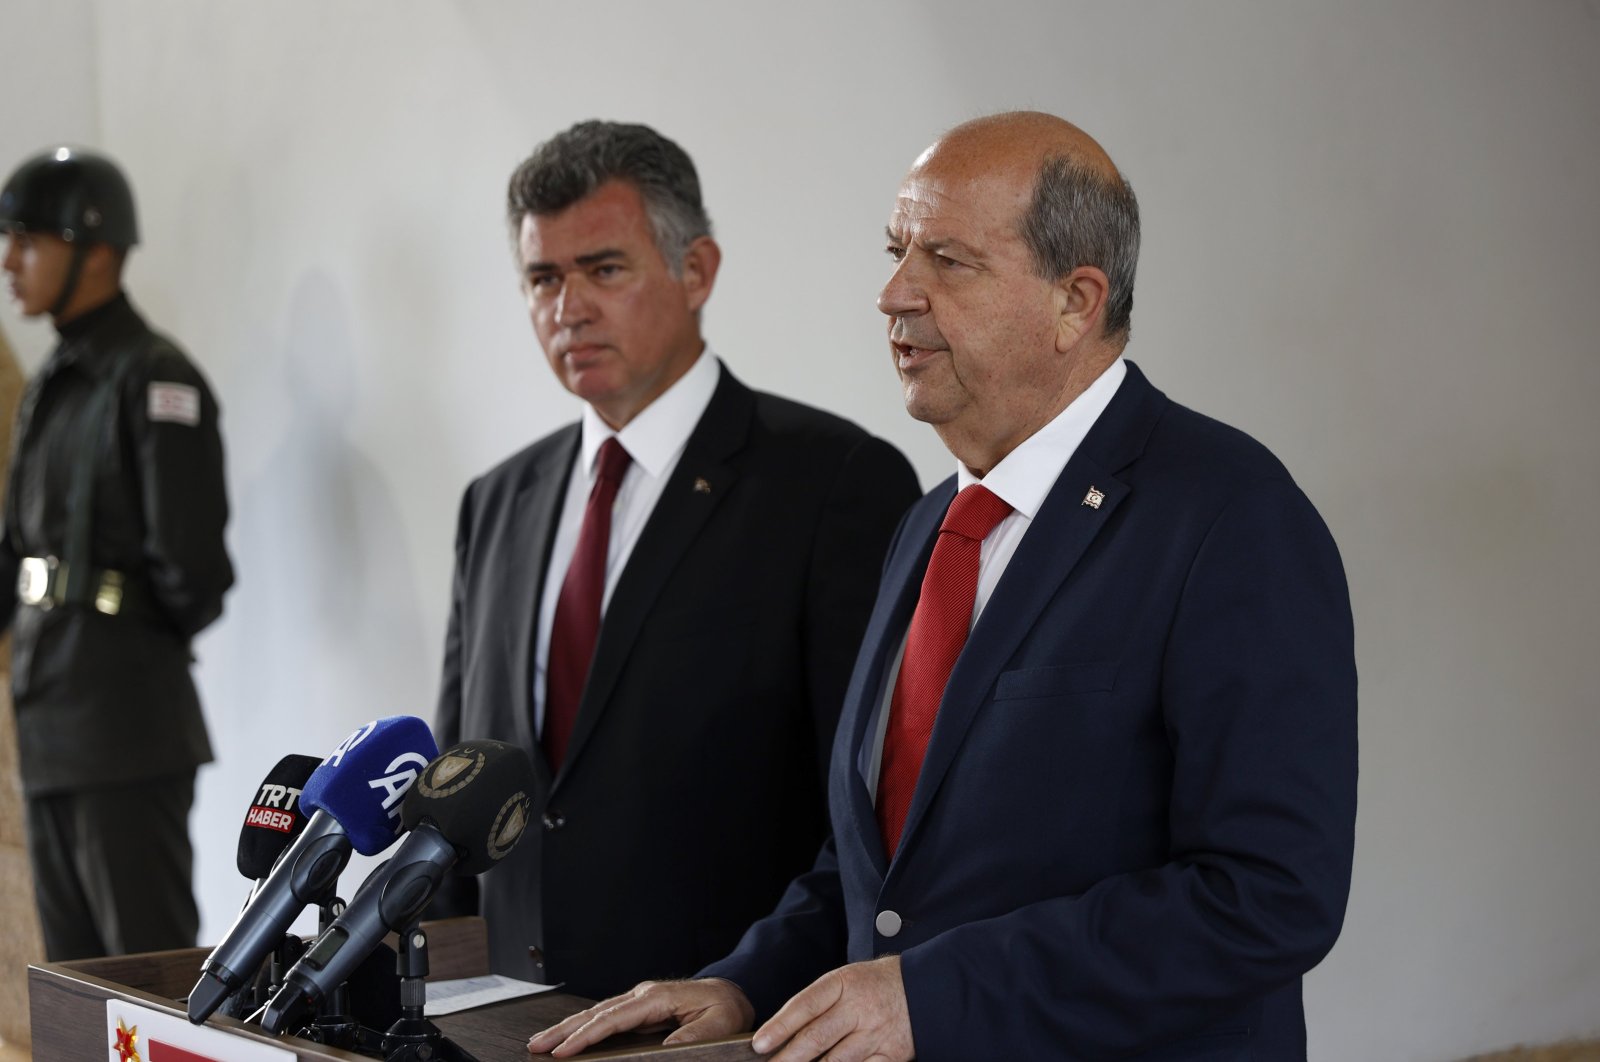 Turkish Republic of Northern Cyprus (TRNC) President Ersin Tatar (R) stands next to Turkish Ambassador Metin Feyzioğlu as he speaks at an event at the presidential building, Lefkoşa (Nicosia), TRNC, April 14, 2024. (AA Photo)